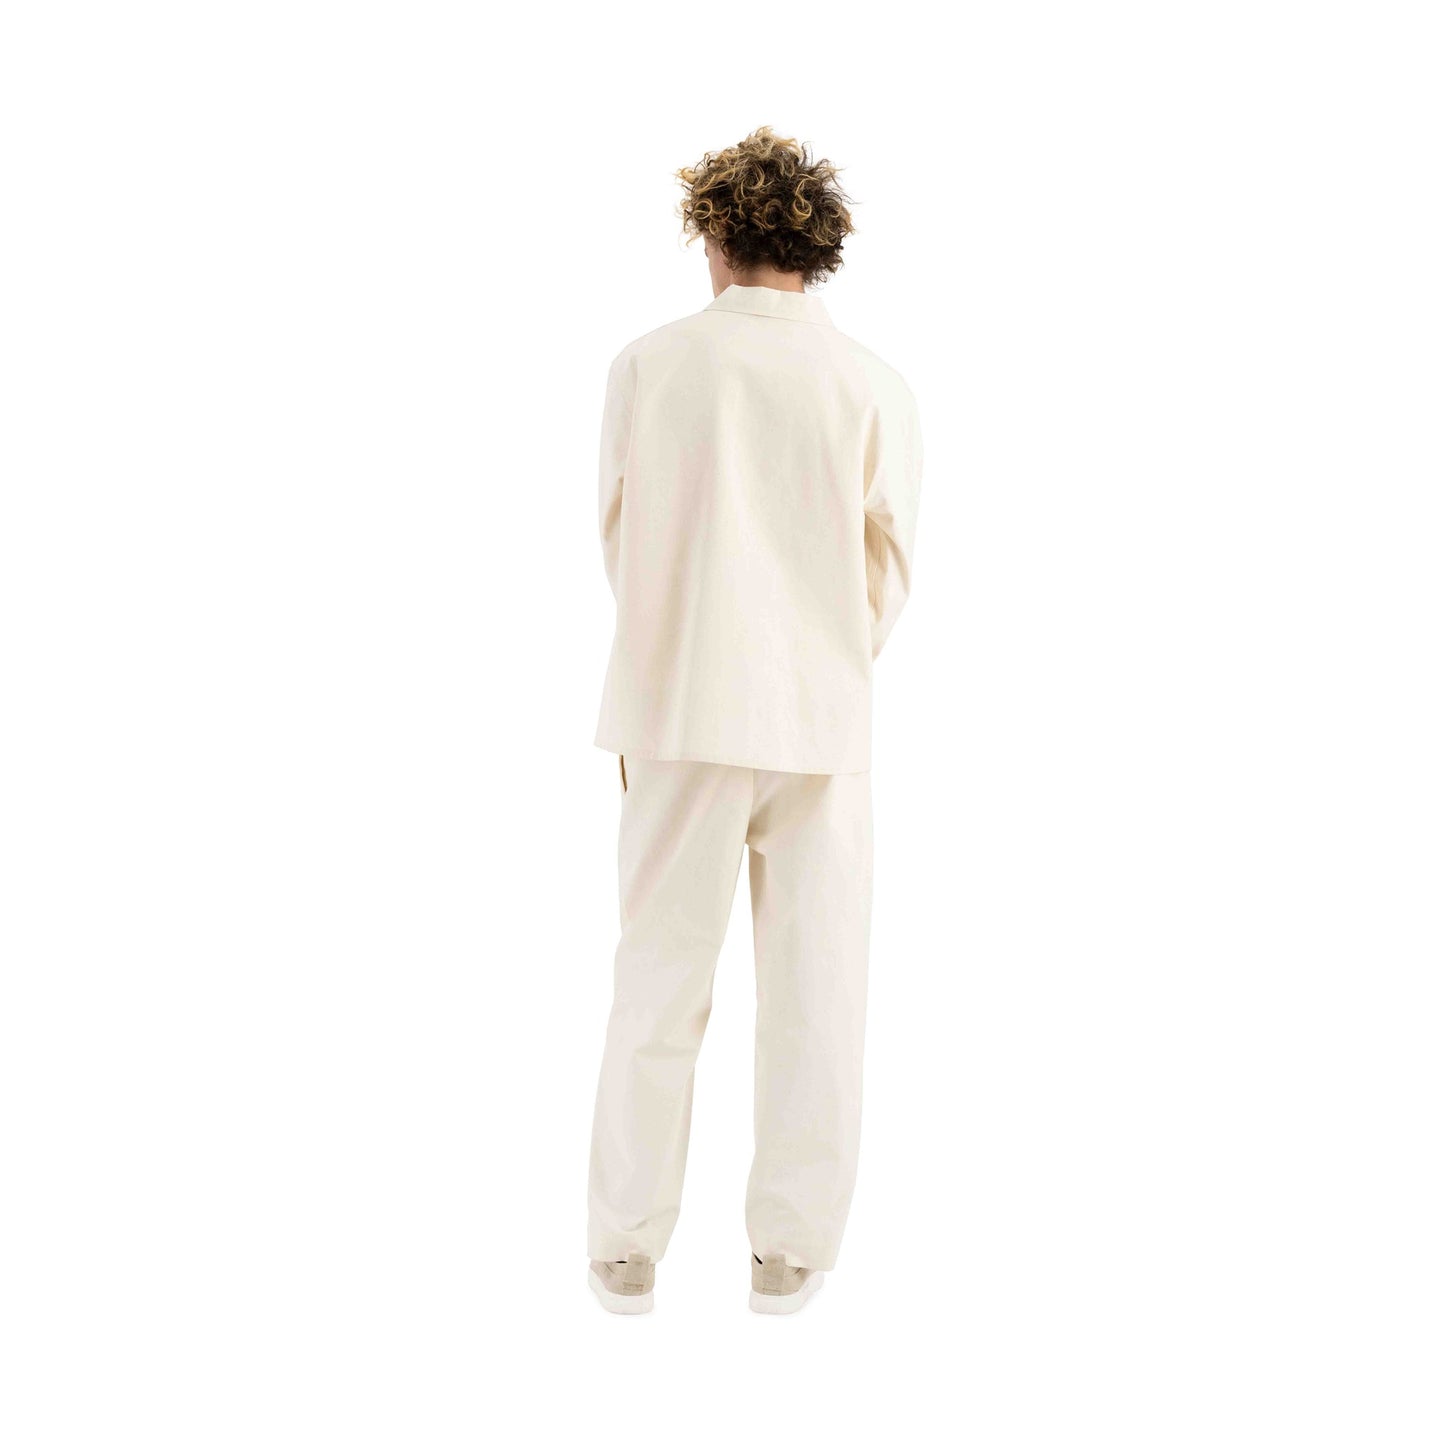 Bill Unlined Workwear Jacket Natural White